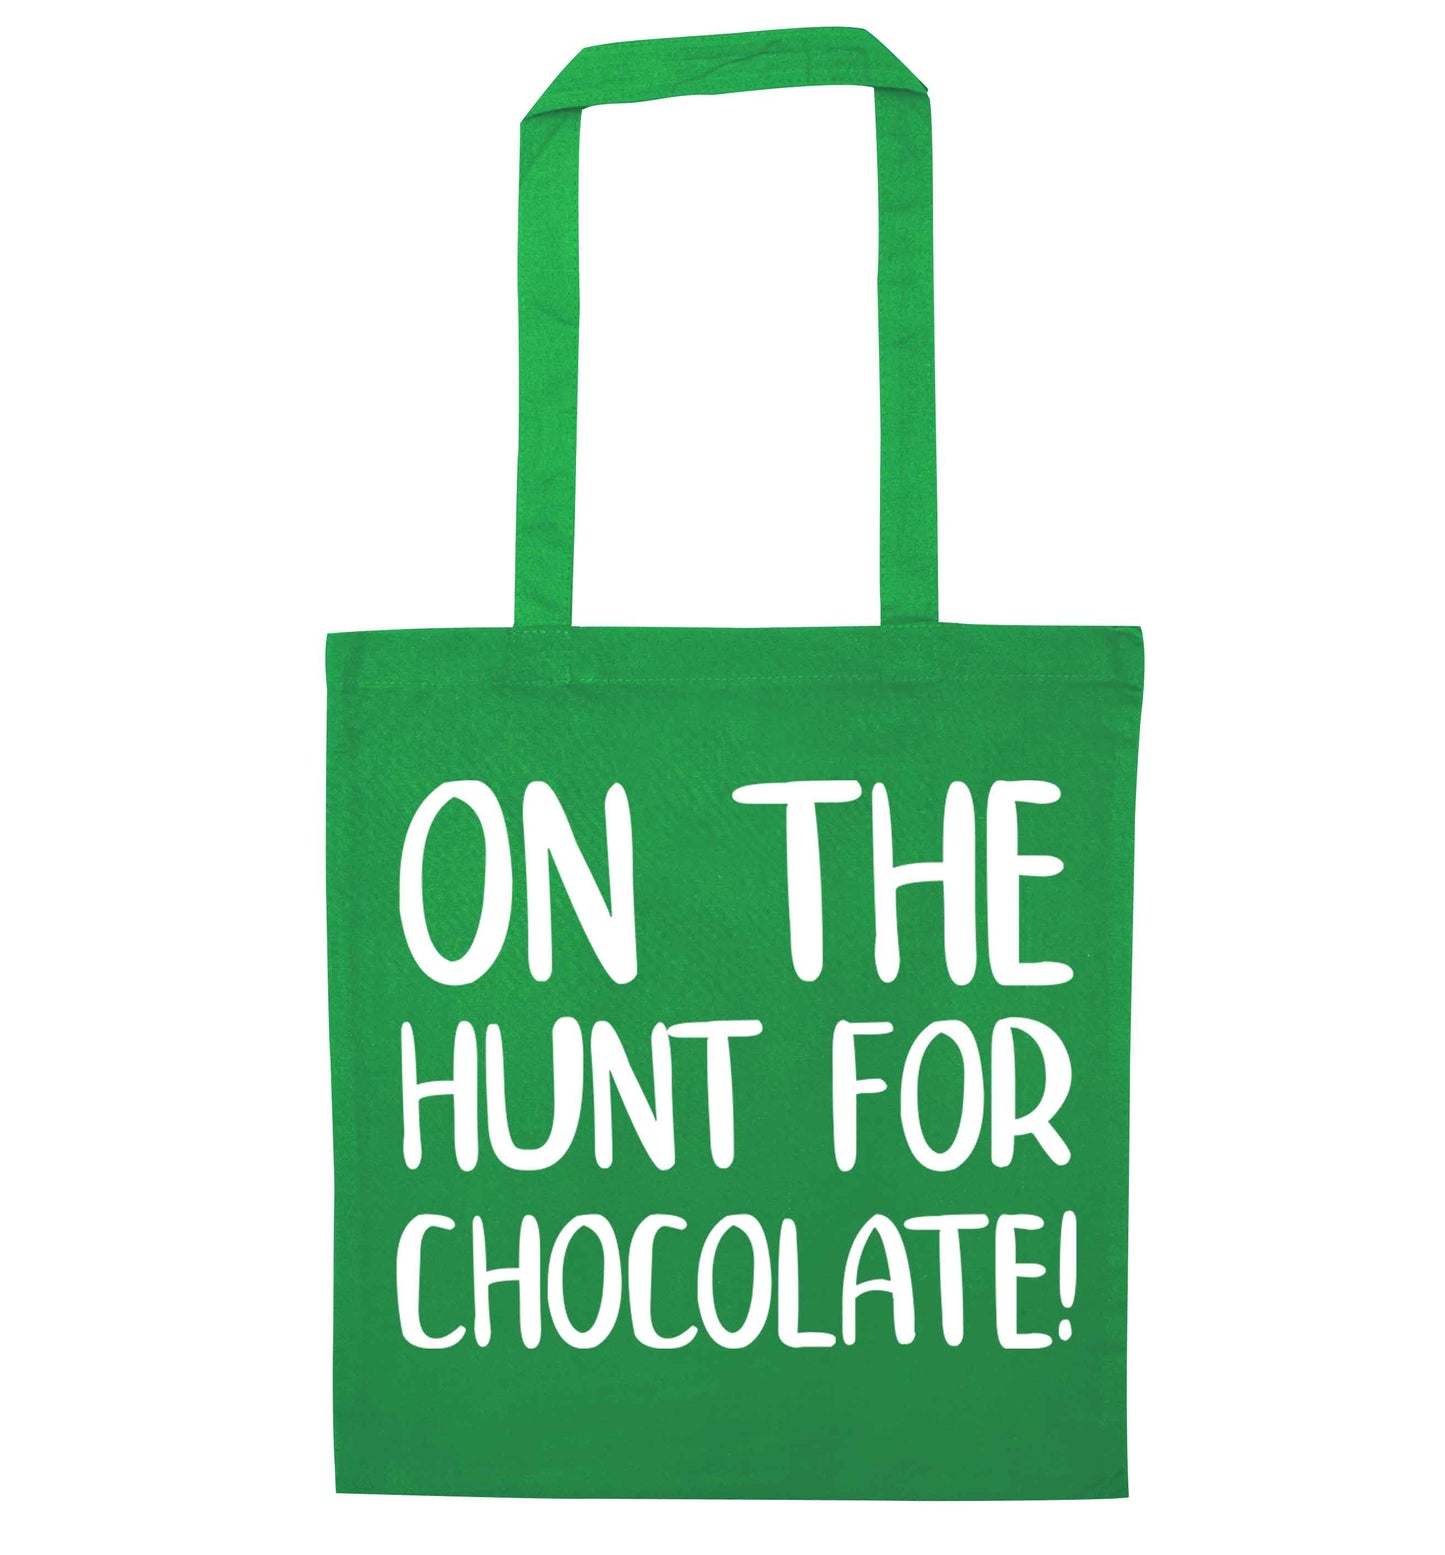 On the hunt for chocolate! green tote bag